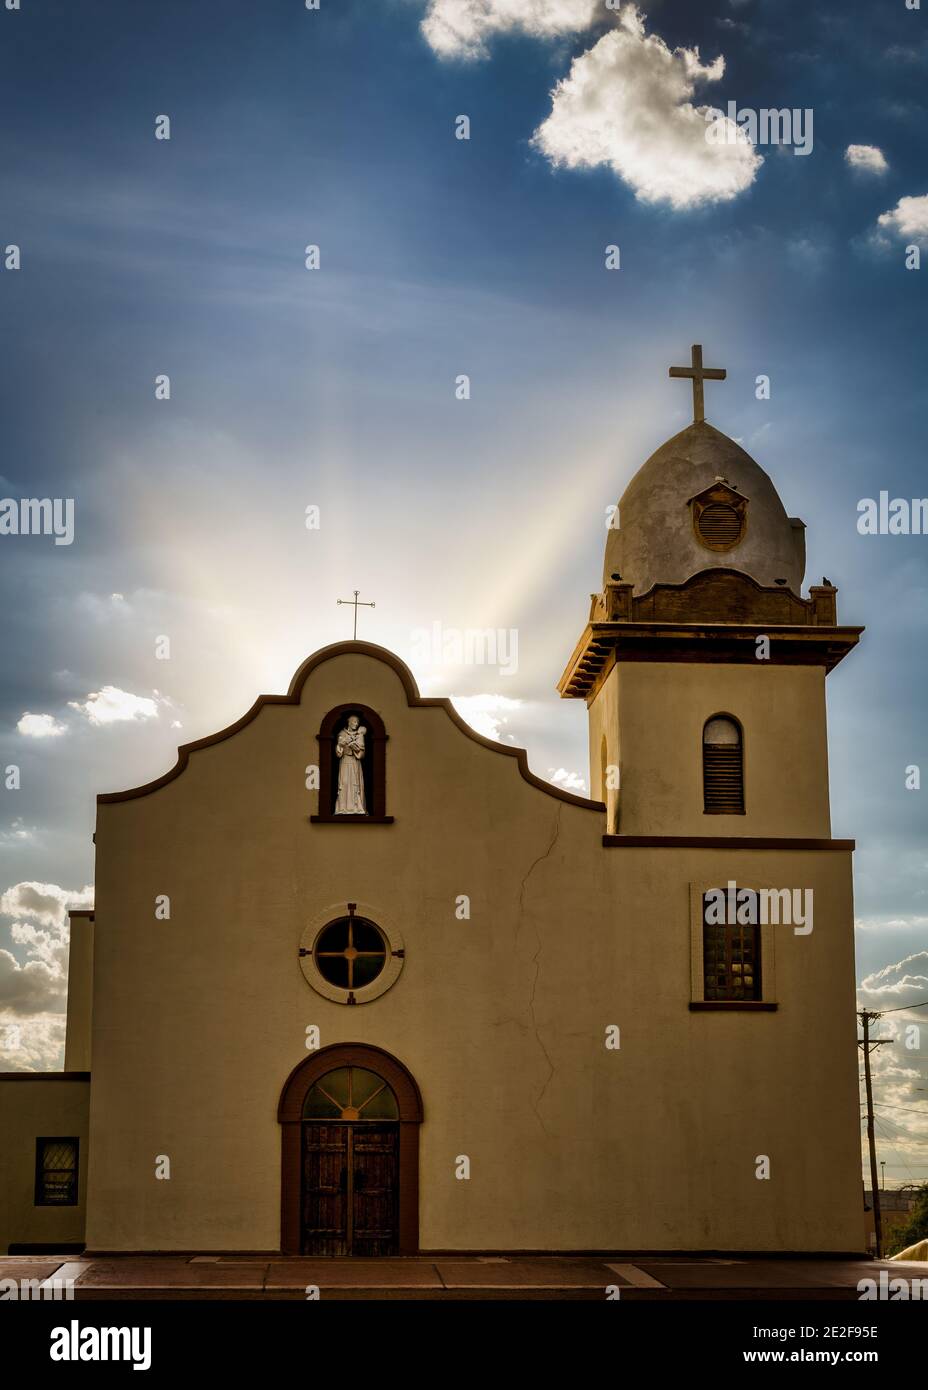 Sunset behind the Ysleta Mission, built in 1682, in El Paso, Texas Stock Photo